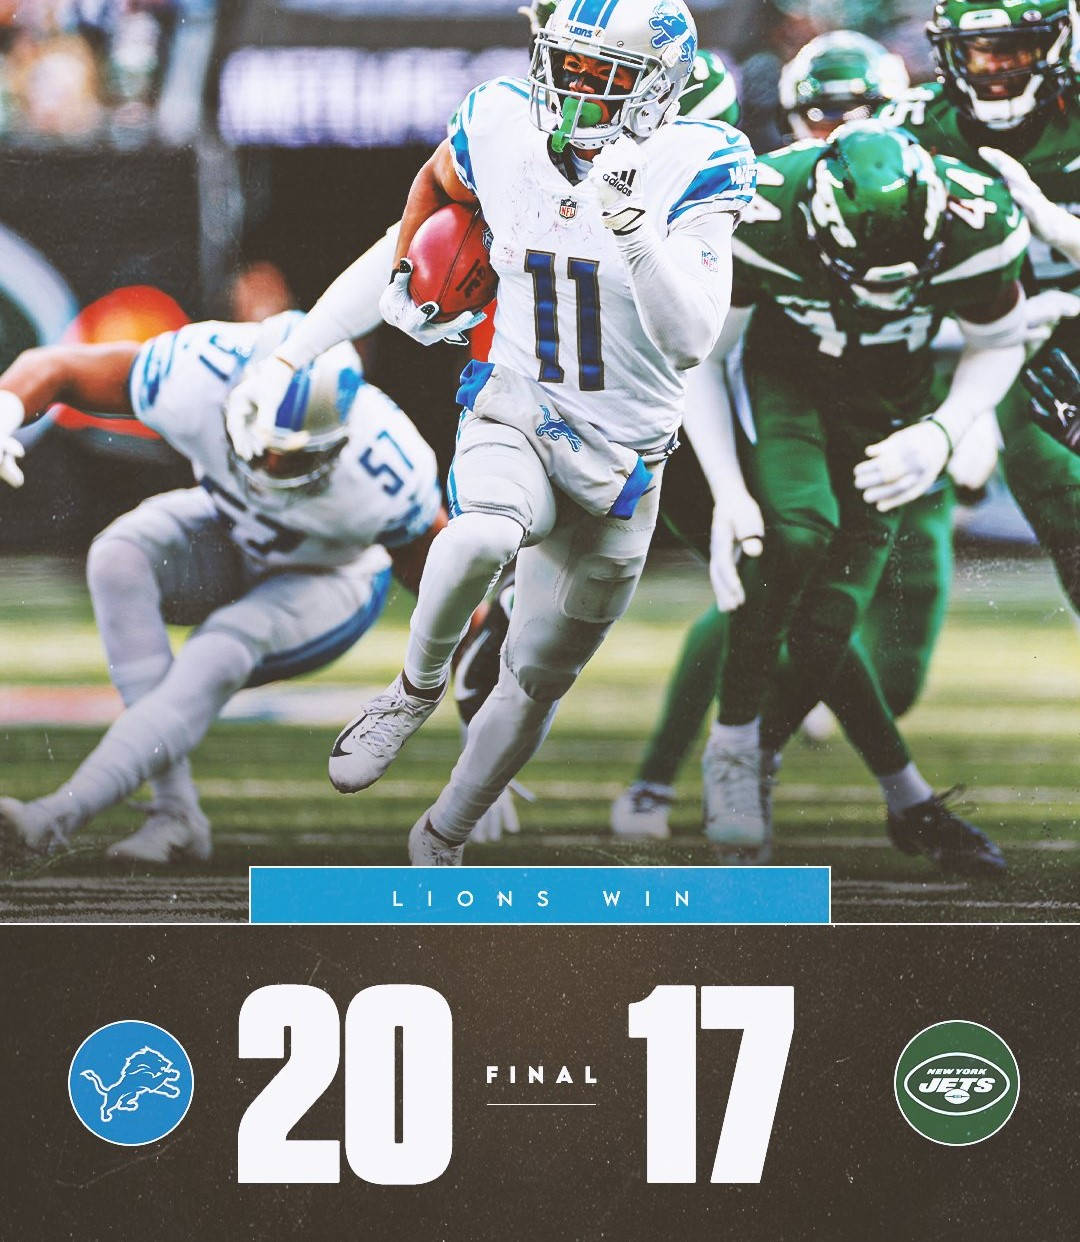 Lions And Jets NFL Scores Wallpaper